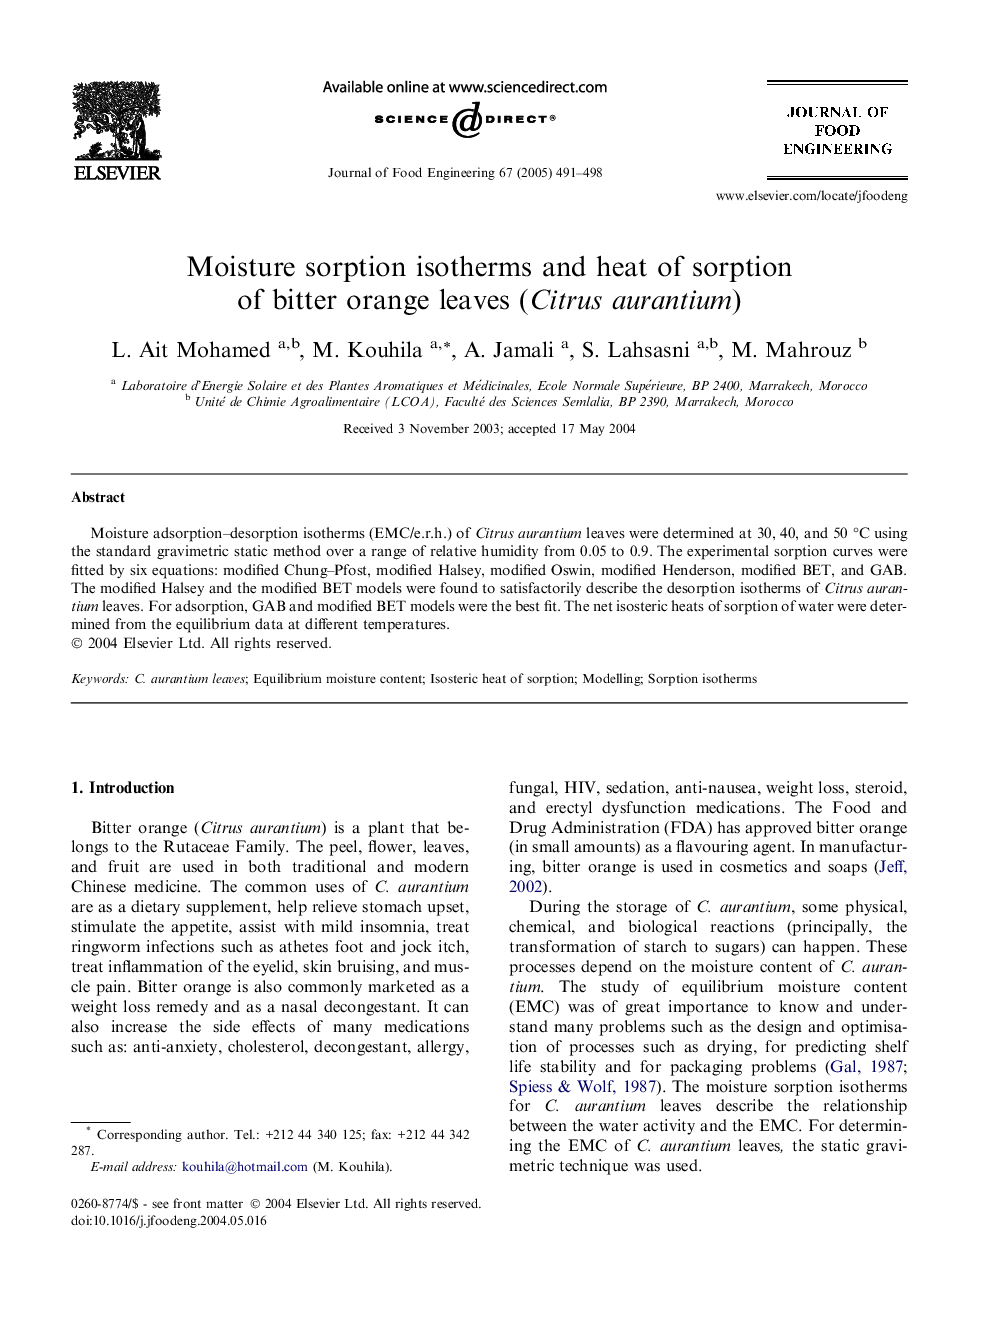 Moisture sorption isotherms and heat of sorption of bitter orange leaves (Citrus aurantium)